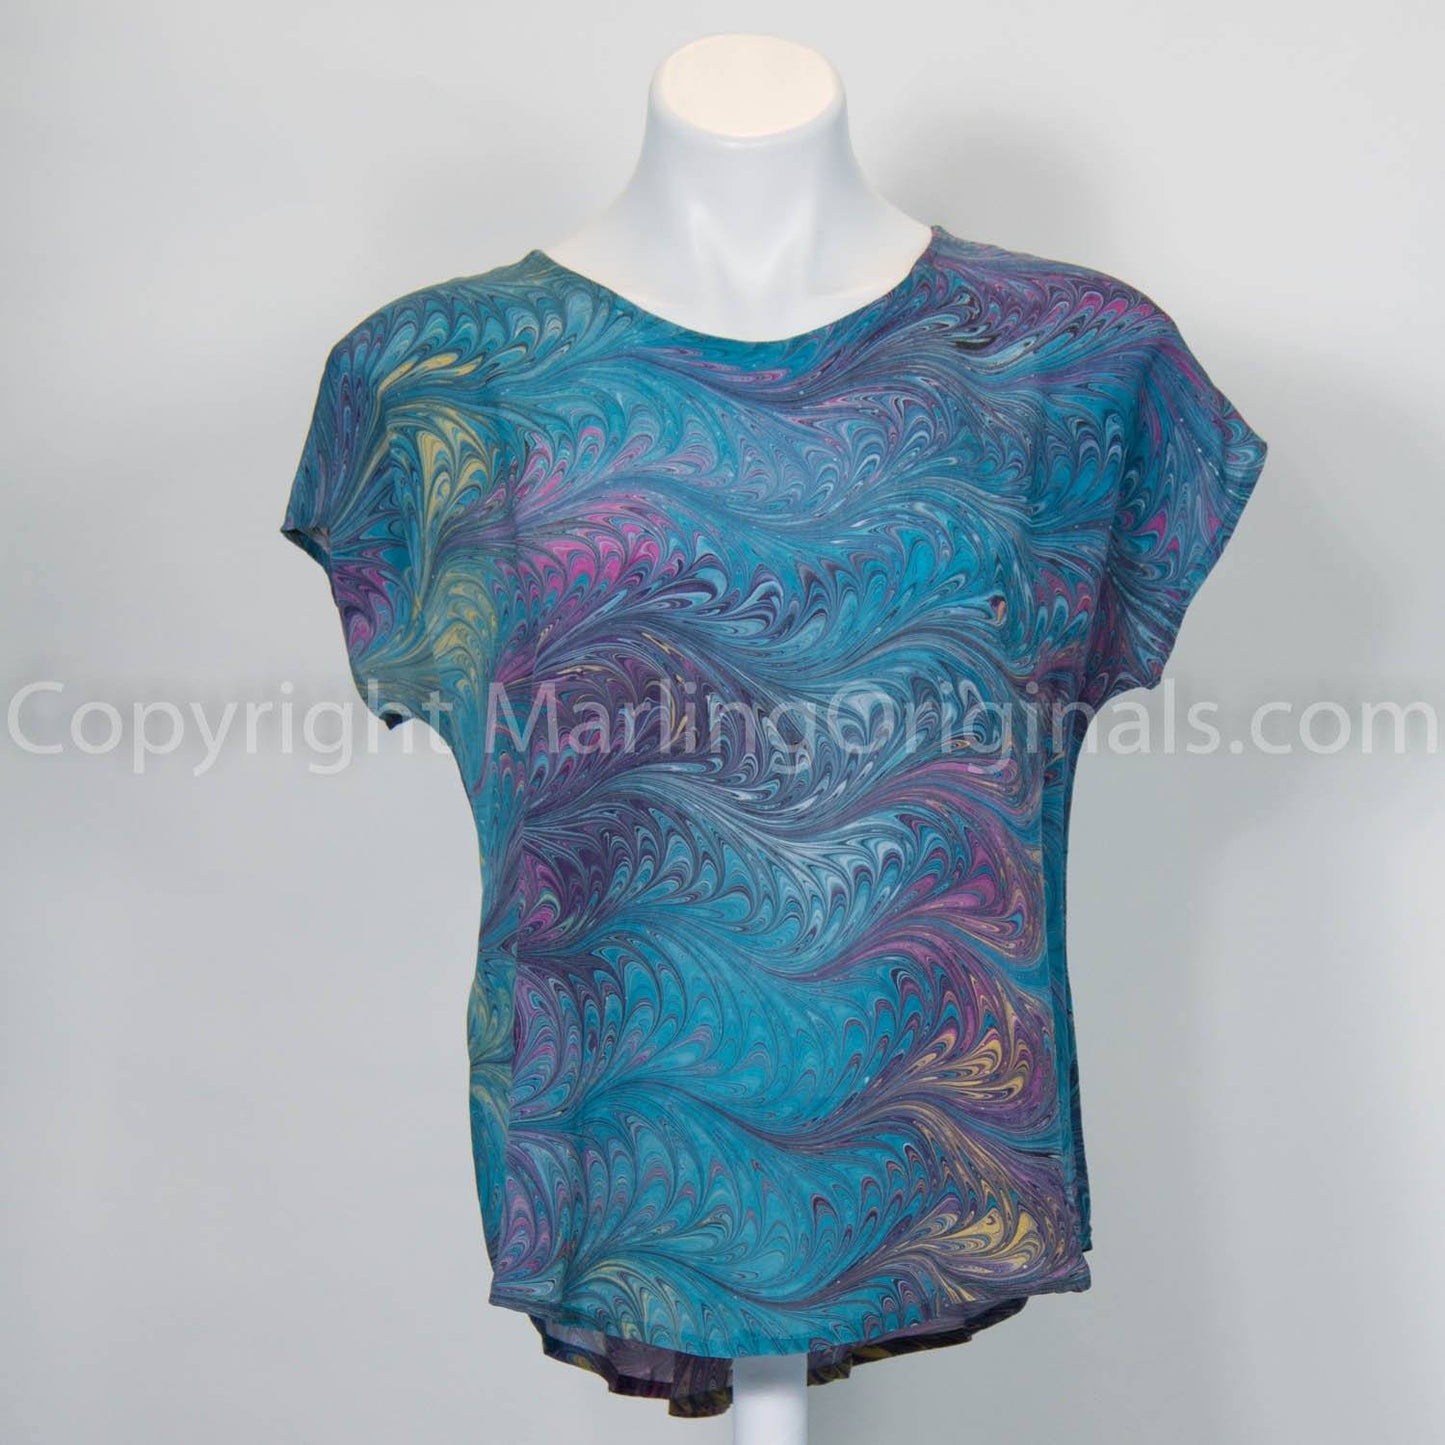 Hand marbled silk top in teal,pink, gold tones.  Short sleeve top with round neck and curved hem.